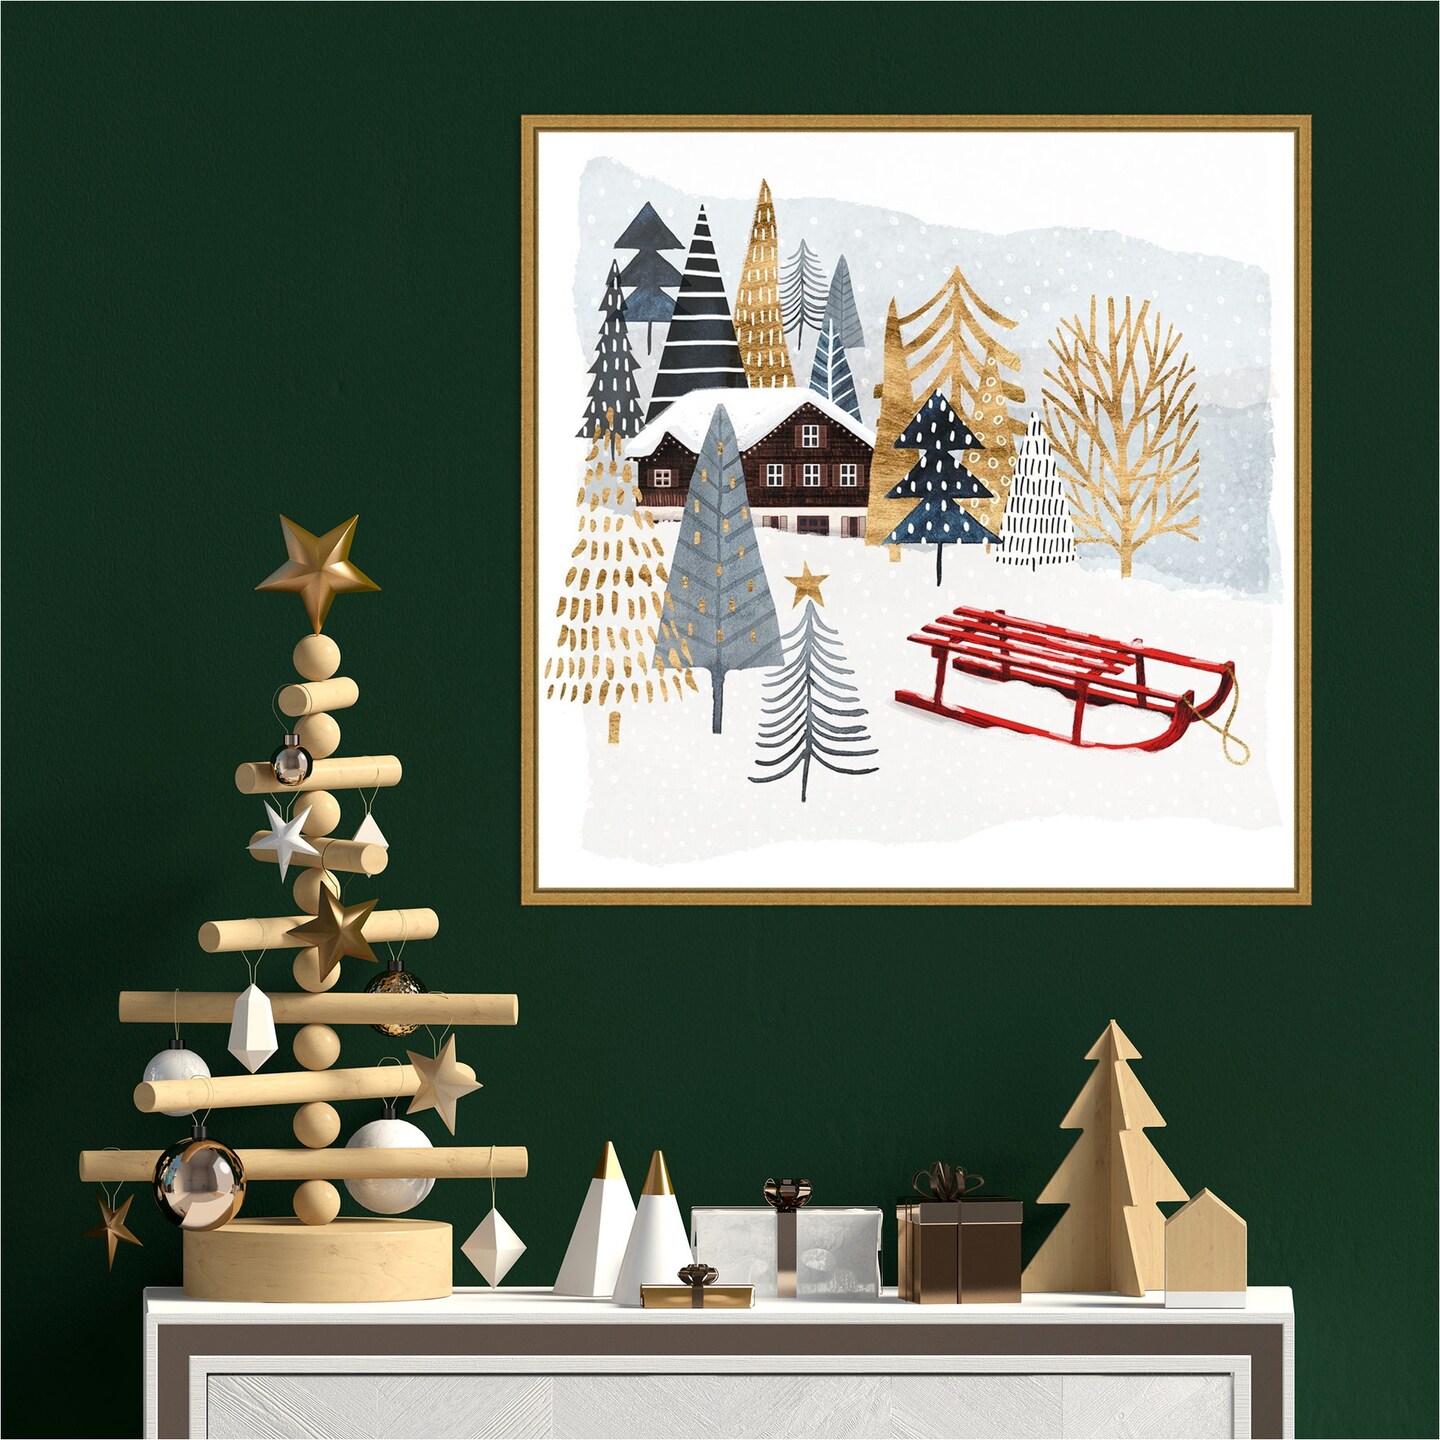 Christmas Chalet II by Victoria Borges 22-in. W x 22-in. H. Canvas Wall Art Print Framed in Gold